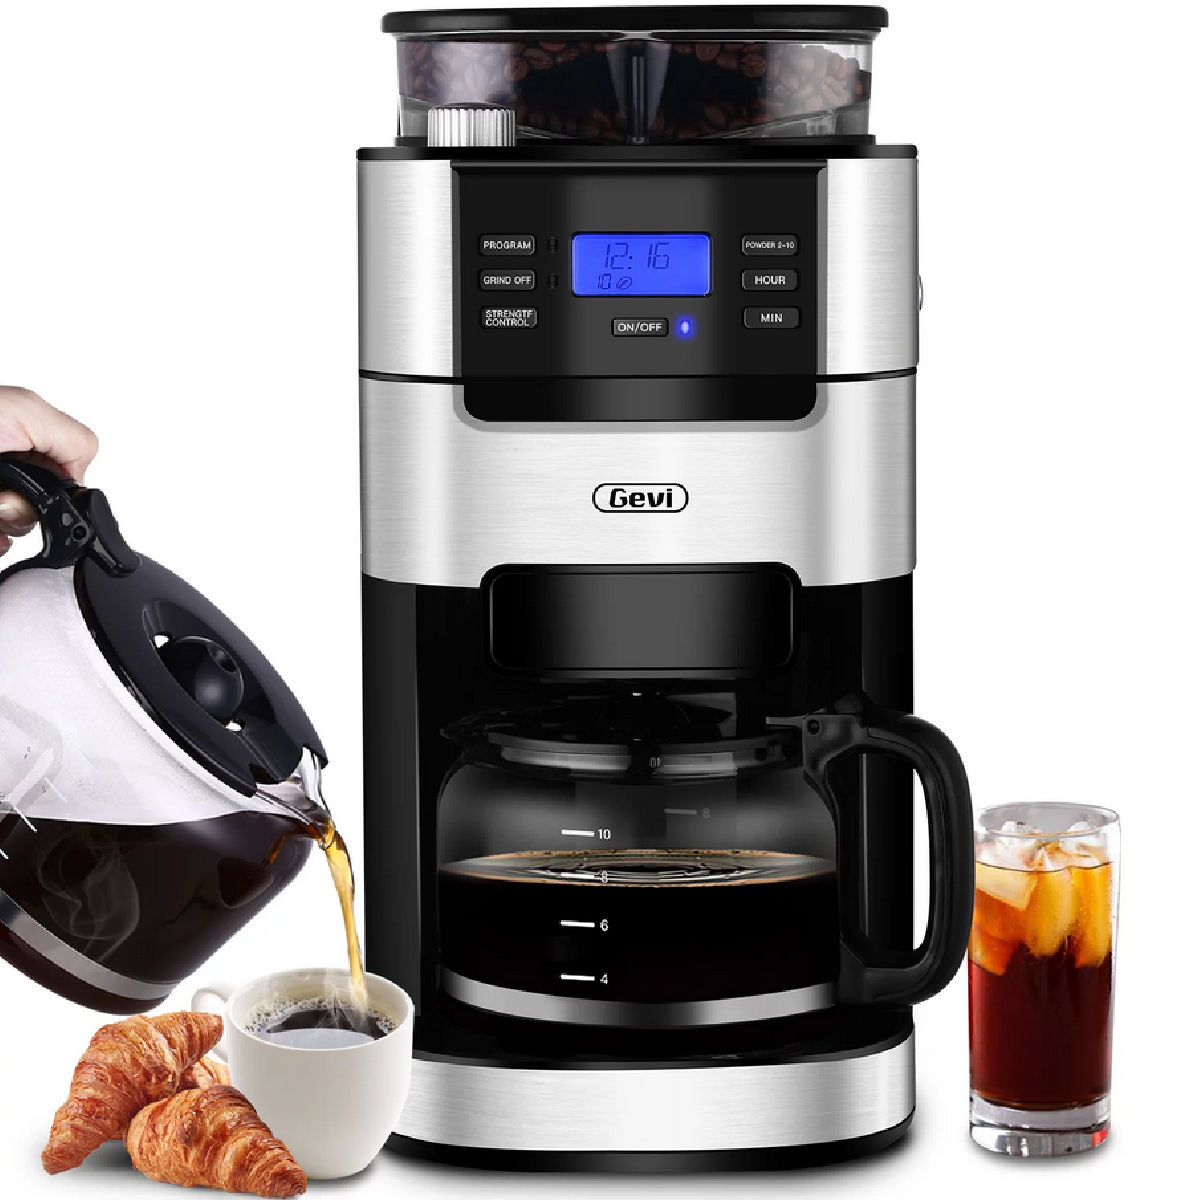 GEVI 10-Cup Programmable Grind and Brew Coffee Maker